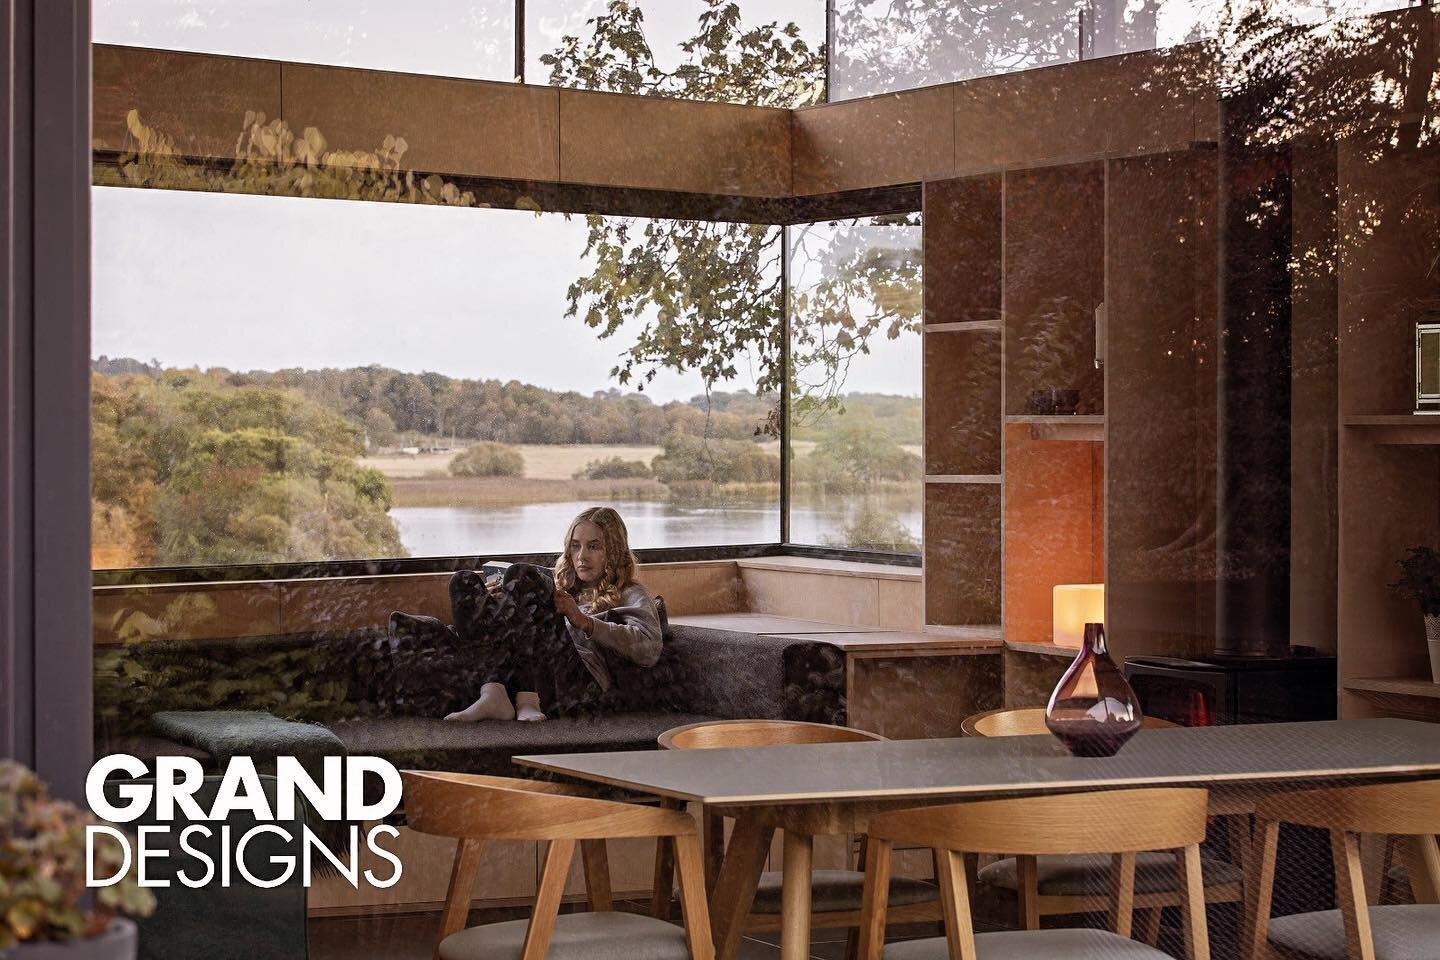 Grand Designs Magazine Dec 2023 issue is out now, featuring an interview about the design of our garden pavilion overlooking a loch in rural Angus.

Curl up on the sofa and put the fire on, to read your copy. Or sign up to read the digital version fo